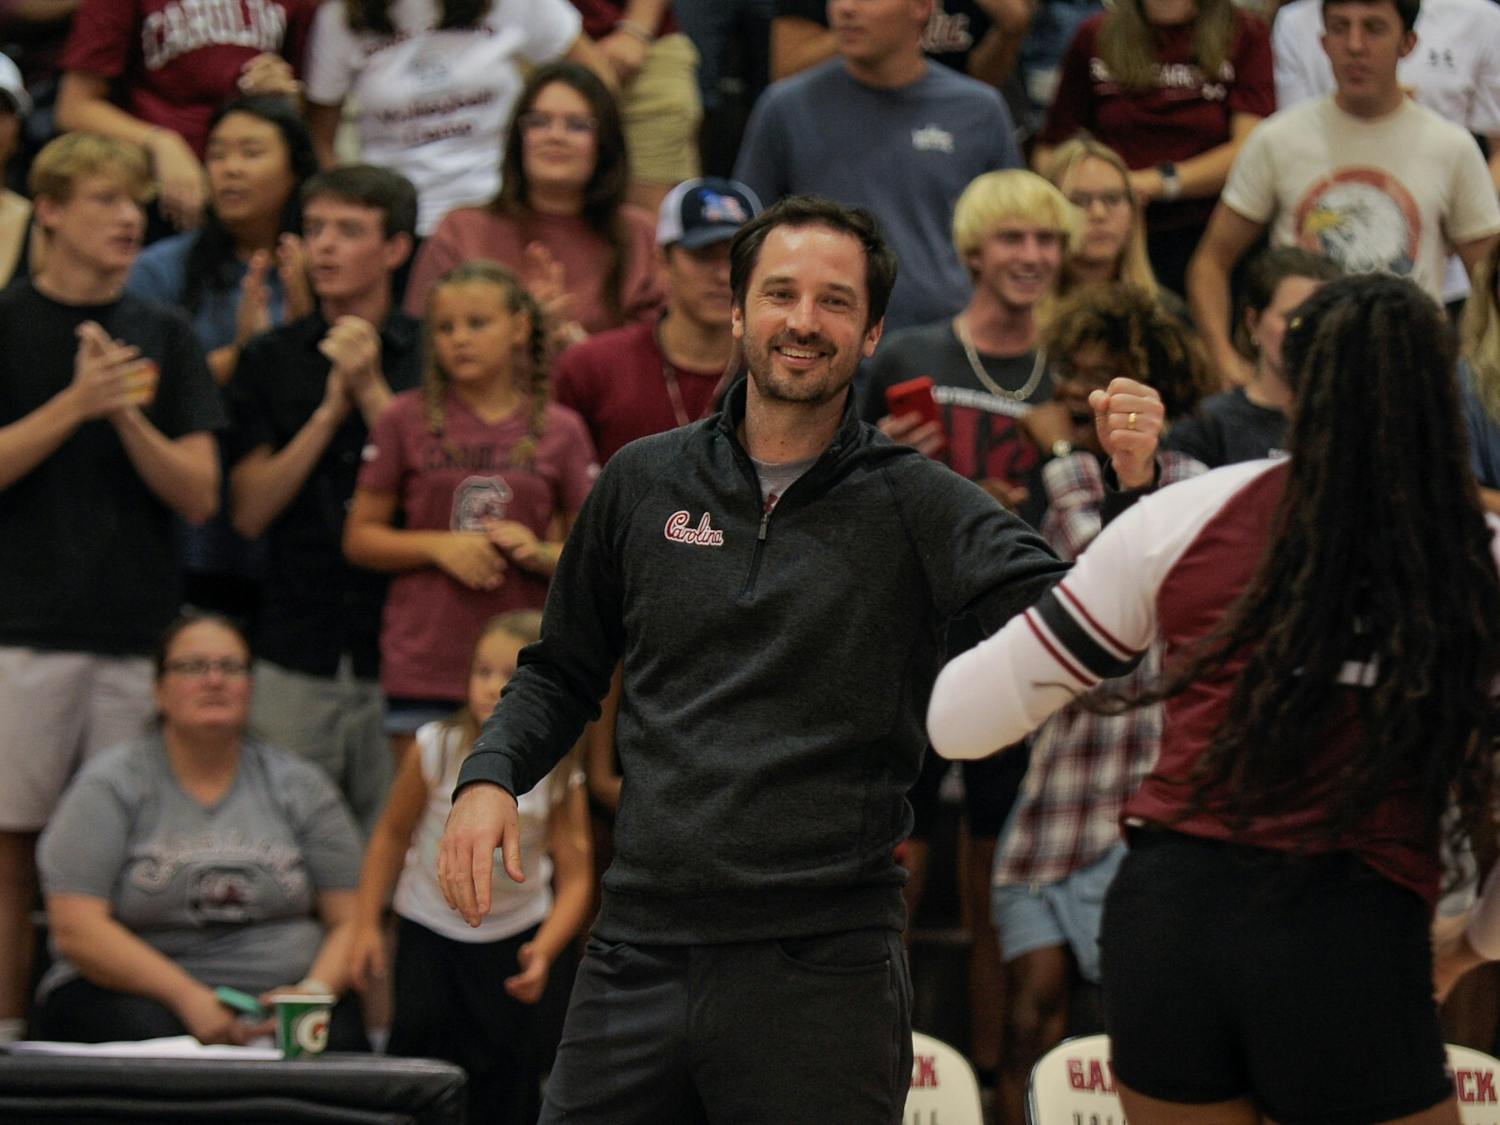 South Carolina head volleyball coach Tom Mendoza fist bumps sophomore Oby Anadi with a smile during the Carolina Classic on August 27, 2022 at the Carolina Volleyball Center.